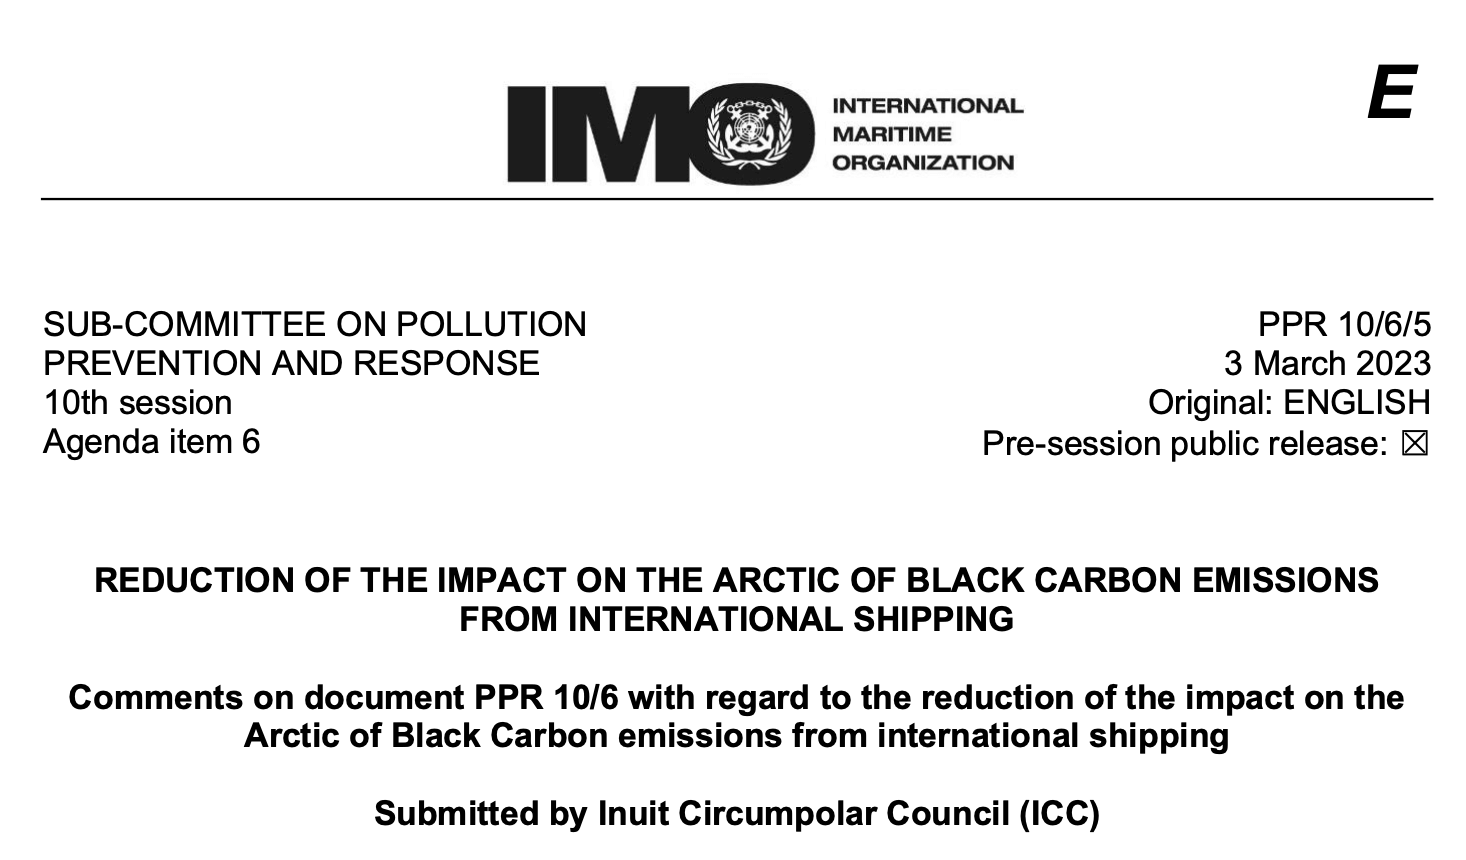 PPR 10-6-5 - Comments on document PPR 106 with regard to the reduction of the impact on the Arctic of Black Carbon Emissions from International shipping